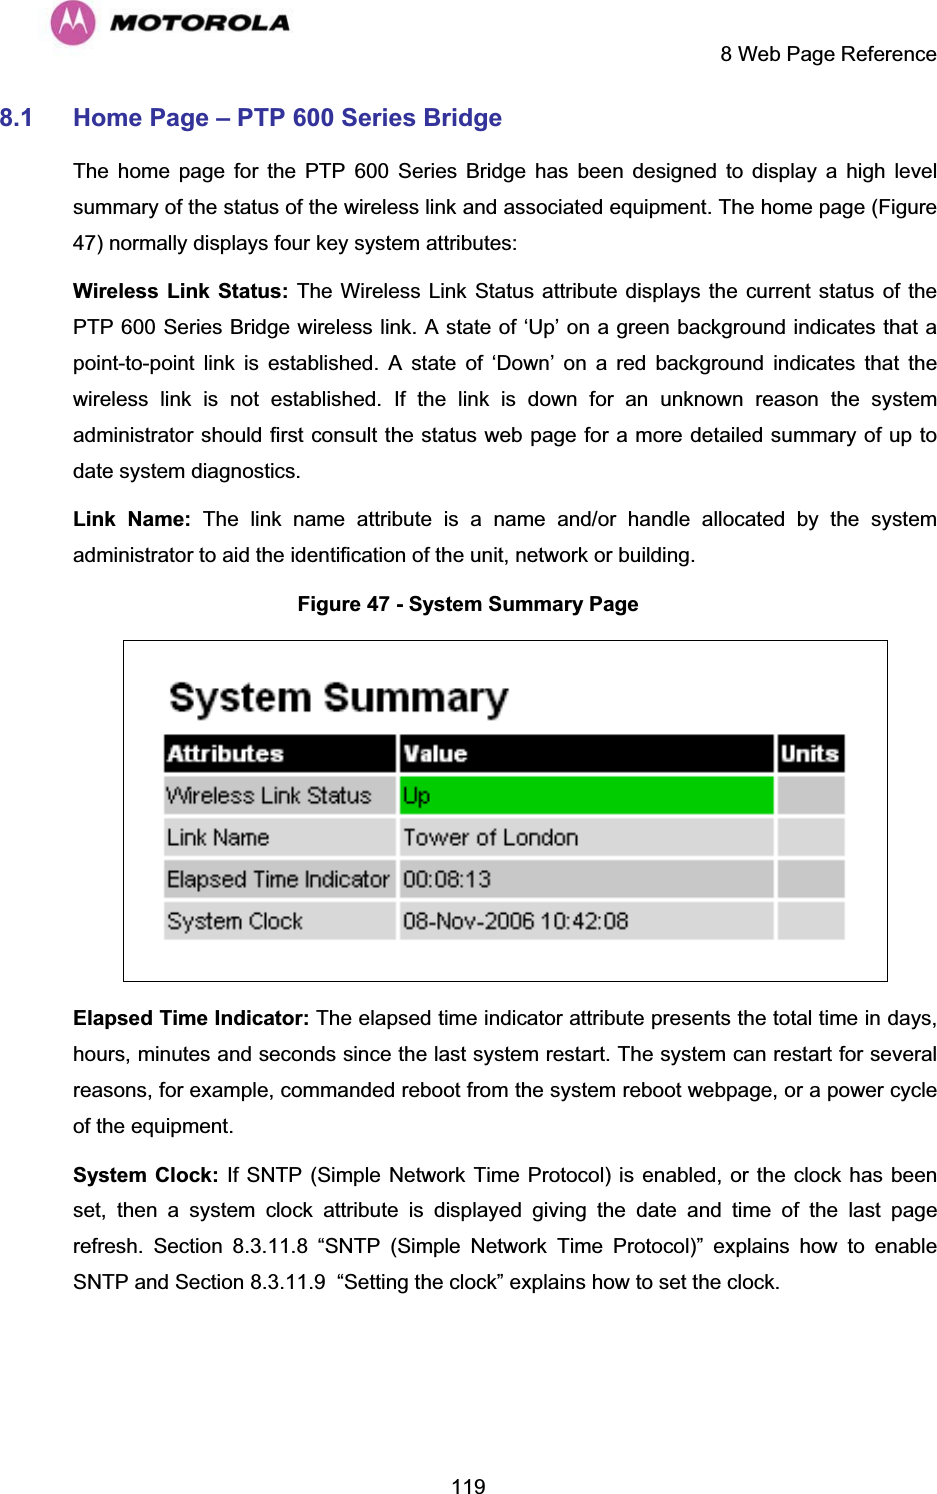     8 Web Page Reference  1198.1 Home Page – PTP 600 Series Bridge  The home page for the PTP 600 Series Bridge has been designed to display a high level summary of the status of the wireless link and associated equipment. The home page (Figure 47) normally displays four key system attributes: Wireless Link Status: The Wireless Link Status attribute displays the current status of the PTP 600 Series Bridge wireless link. A state of ‘Up’ on a green background indicates that a point-to-point link is established. A state of ‘Down’ on a red background indicates that the wireless link is not established. If the link is down for an unknown reason the system administrator should first consult the status web page for a more detailed summary of up to date system diagnostics.  Link Name: The link name attribute is a name and/or handle allocated by the system administrator to aid the identification of the unit, network or building.  Figure 47 - System Summary Page  Elapsed Time Indicator: The elapsed time indicator attribute presents the total time in days, hours, minutes and seconds since the last system restart. The system can restart for several reasons, for example, commanded reboot from the system reboot webpage, or a power cycle of the equipment.  System Clock: If SNTP (Simple Network Time Protocol) is enabled, or the clock has been set, then a system clock attribute is displayed giving the date and time of the last page refresh. Section 8.3.11.8 “SNTP (Simple Network Time Protocol)” explains how to enable SNTP and Section 8.3.11.9  “Setting the clock” explains how to set the clock. 